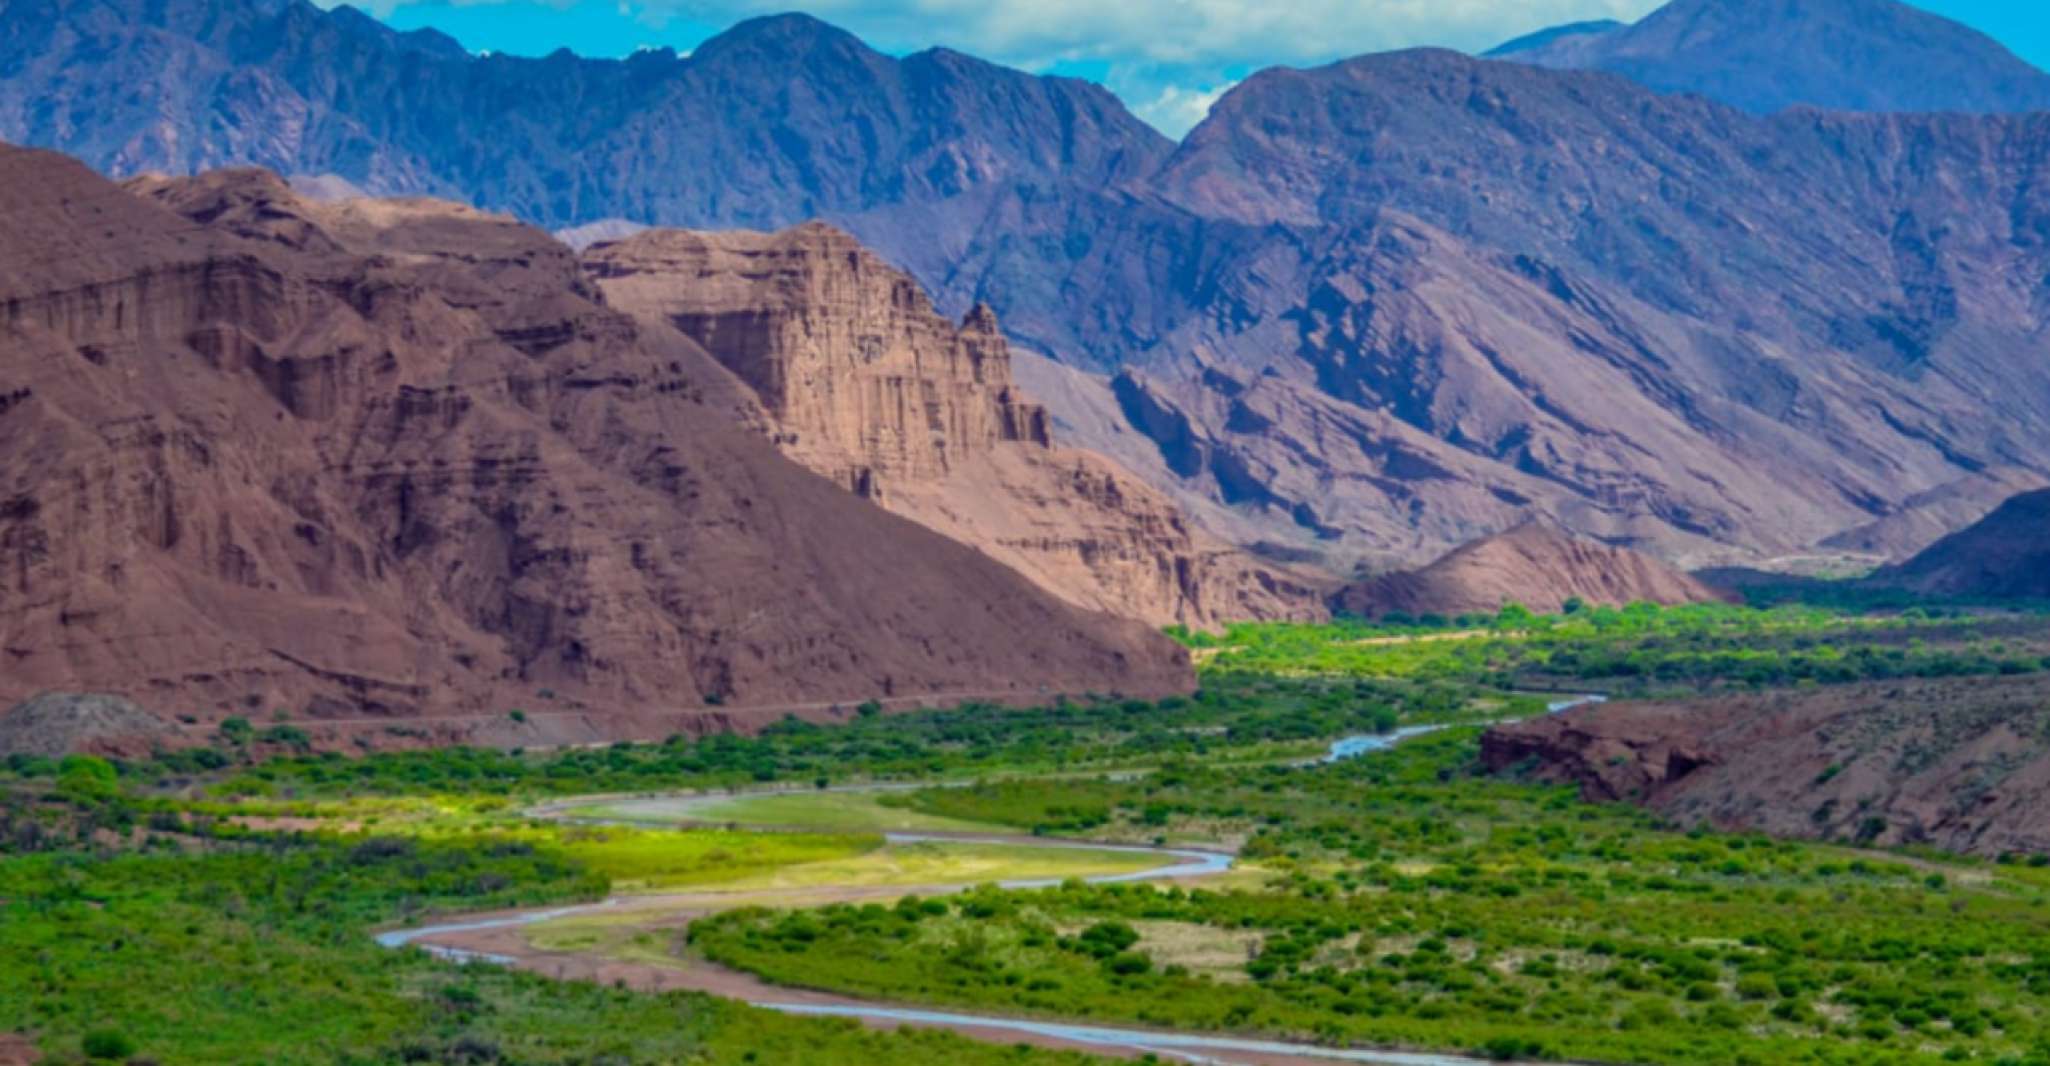 From Salta, Cafayate, land of wines and imposing ravines - Housity